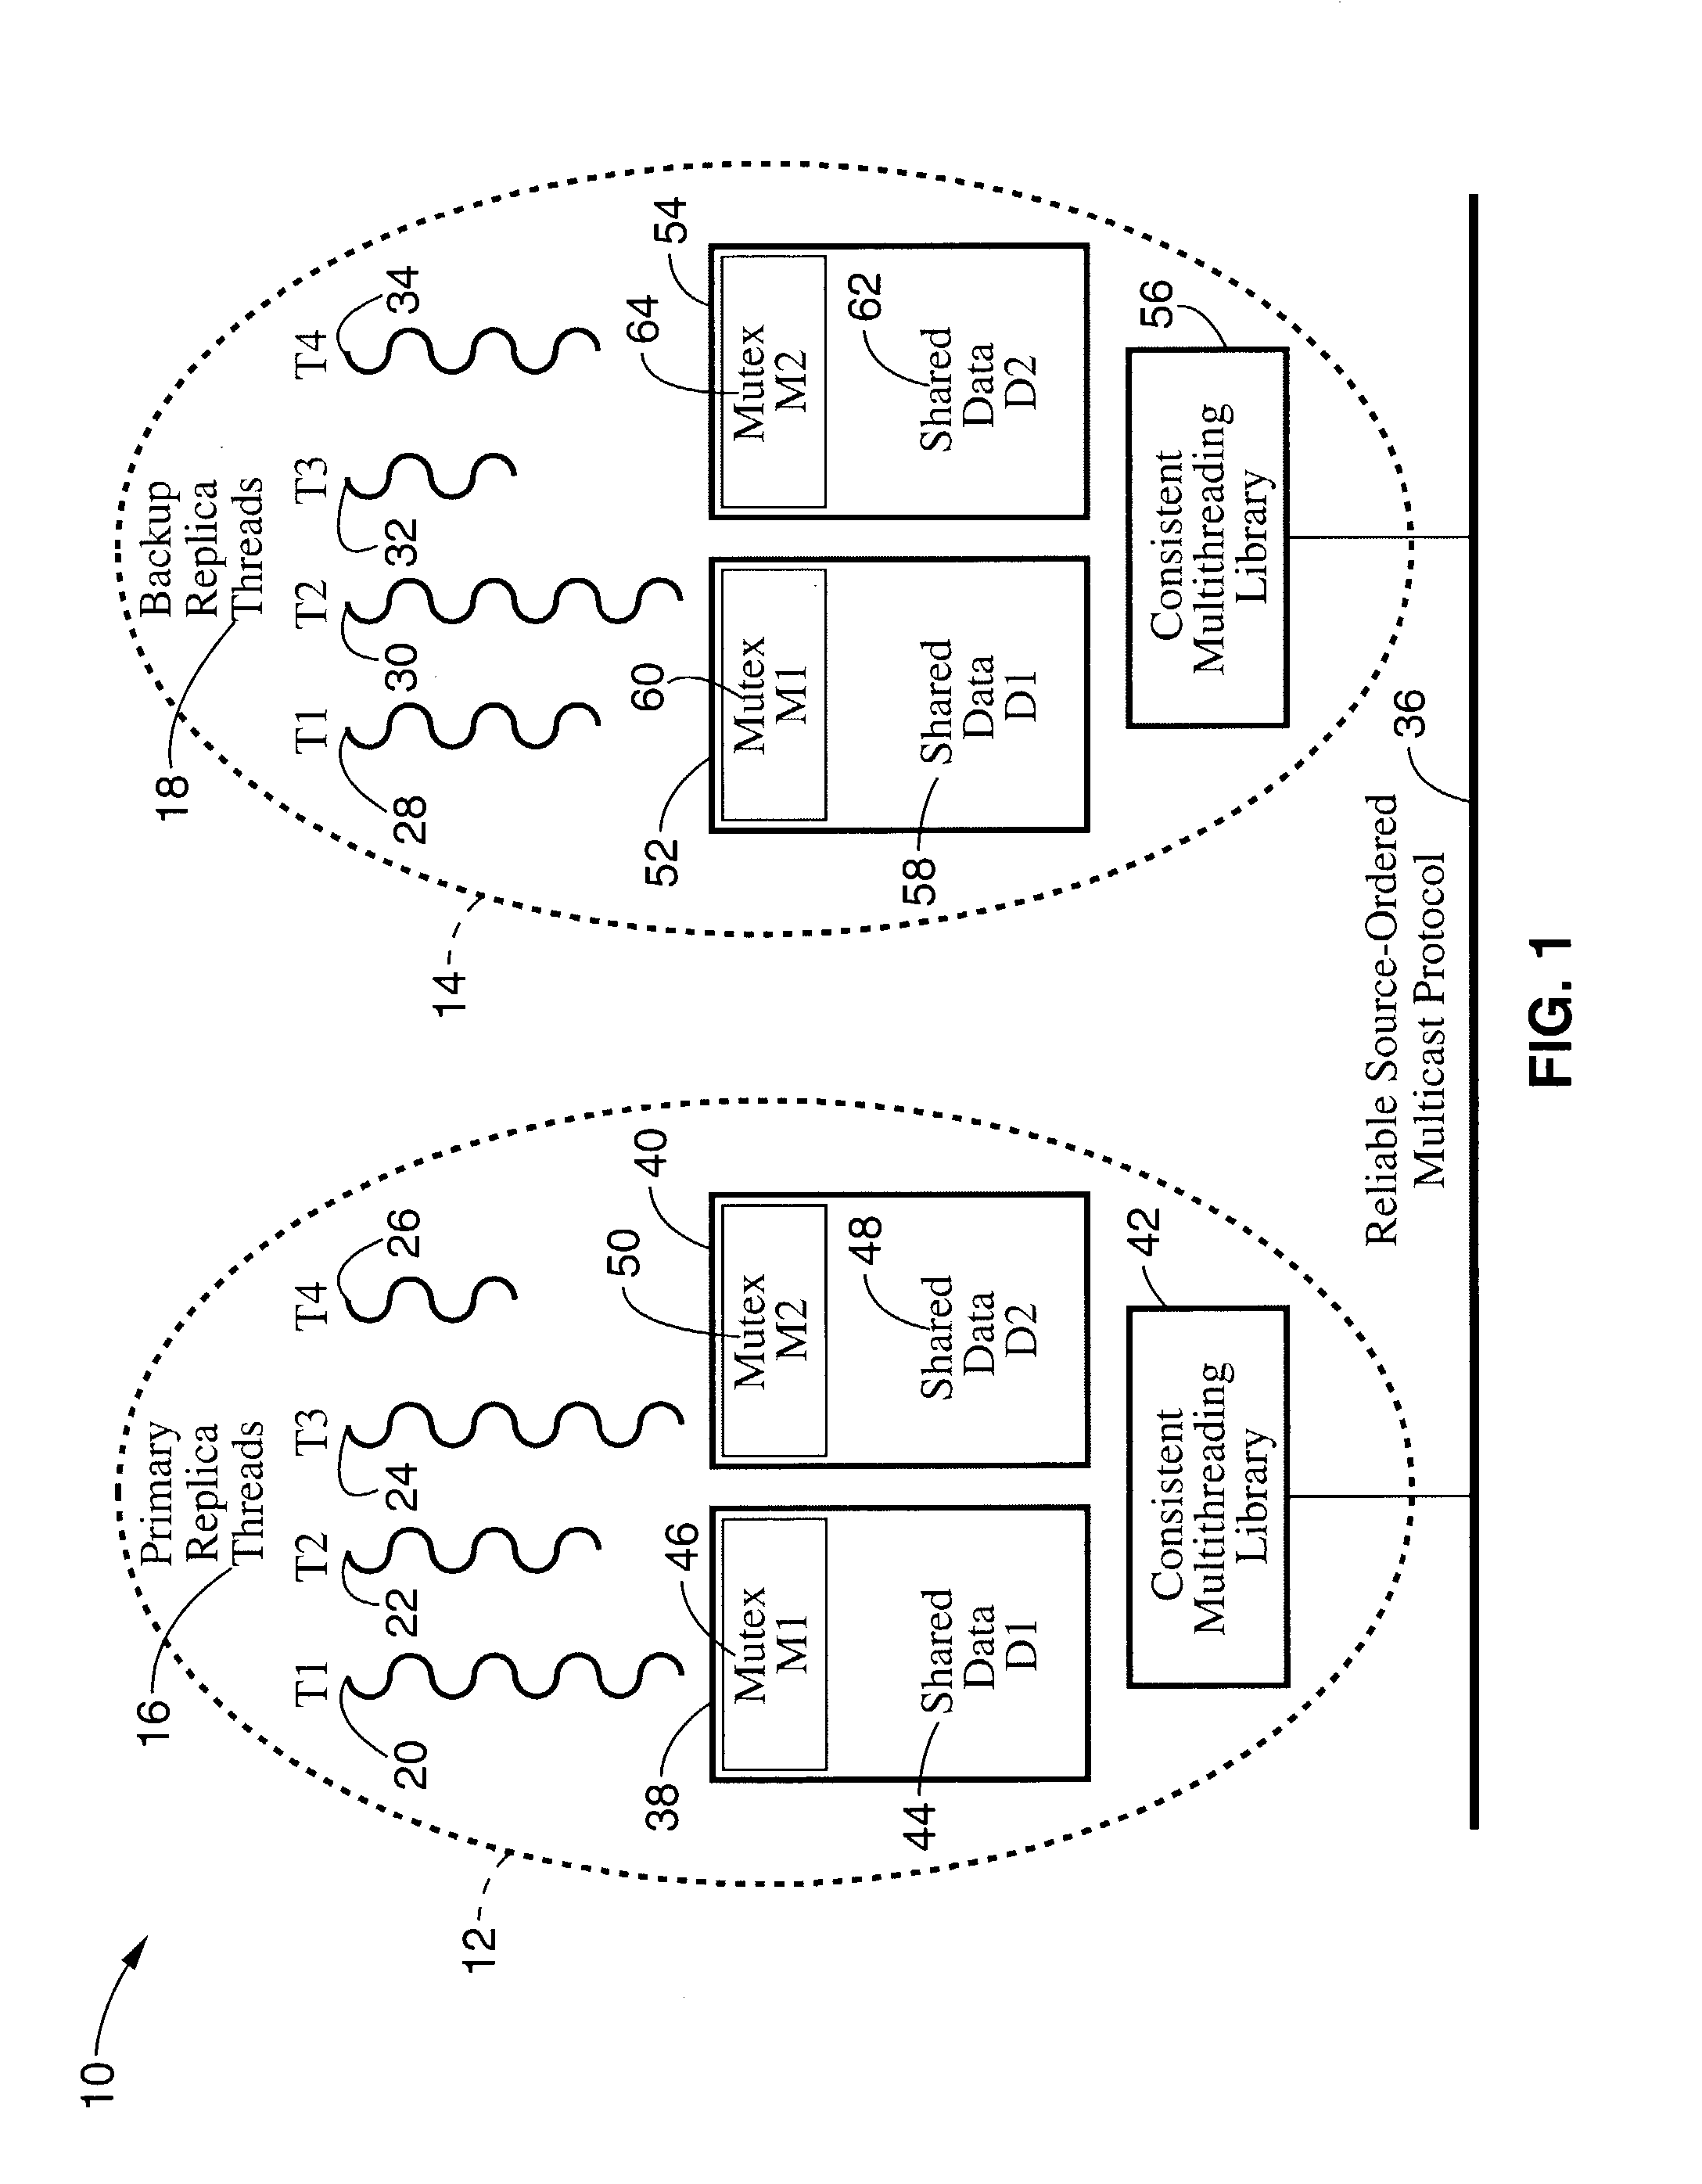 Transparent consistent semi-active and passive replication of multithreaded application programs